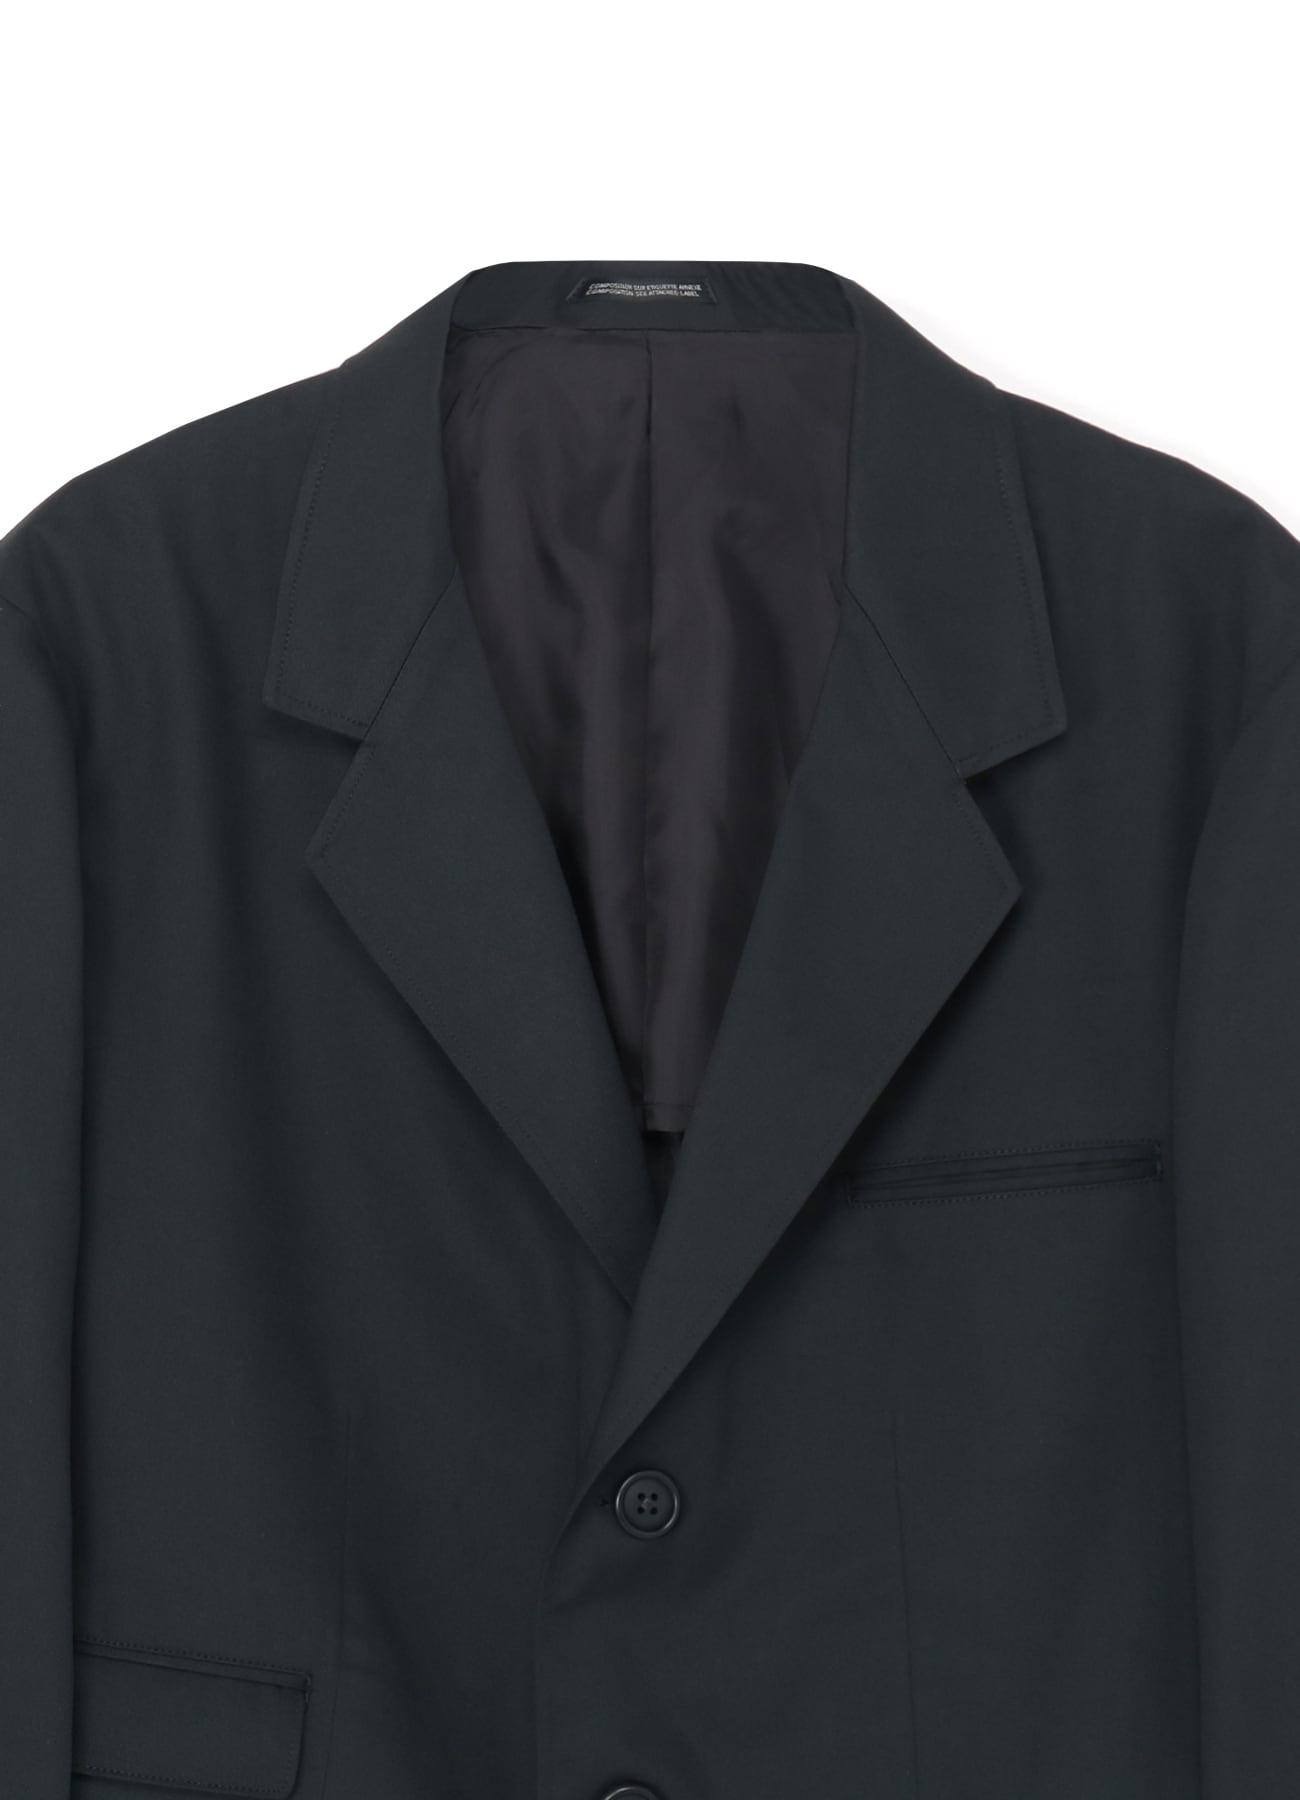 COTTON/POLYESTER TWILL 3-BUTTON JACKET(M Black): Y's for men｜WILDSIDE ...